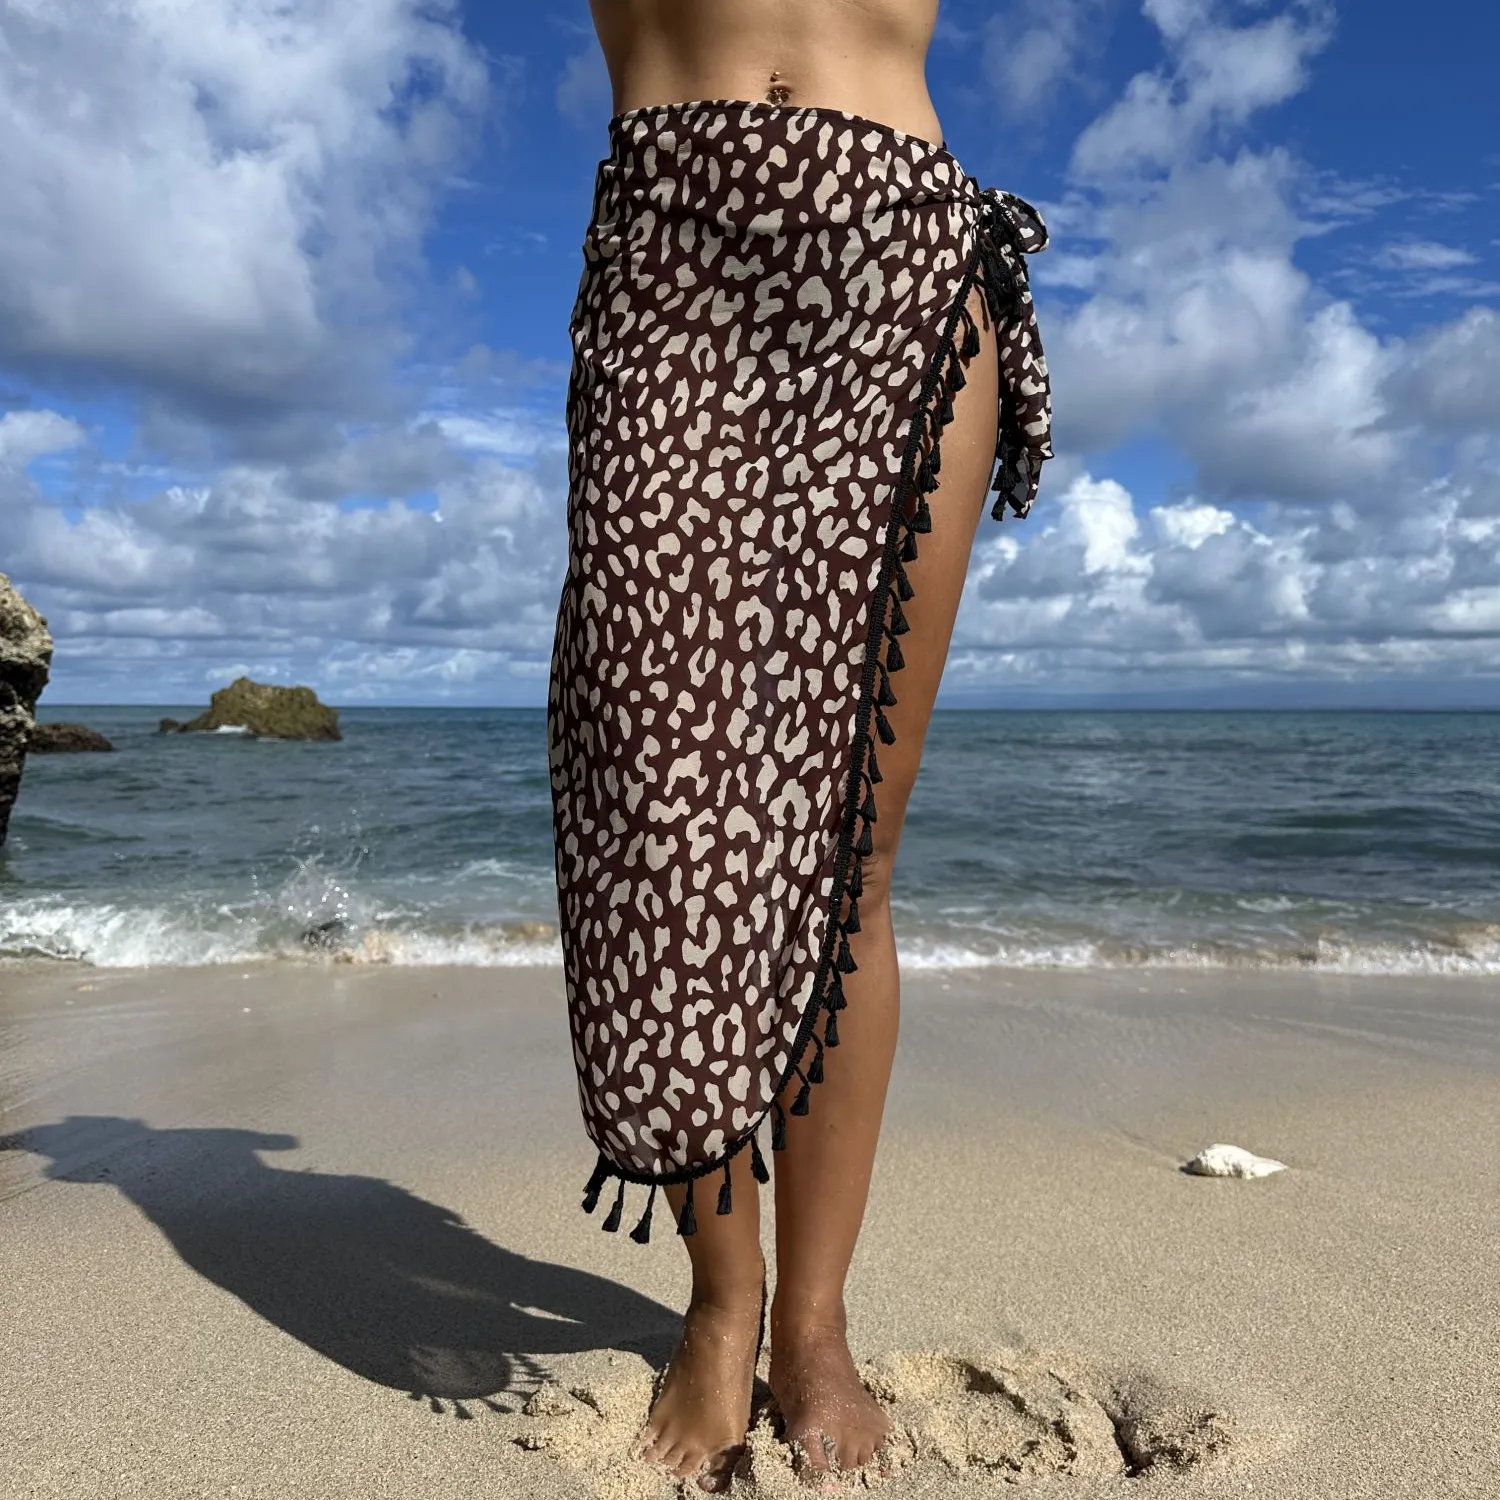 Women Printed Beach Wrap Sarong Cover Up Chiffon Swimsuit Wrap Skirts with Tassels